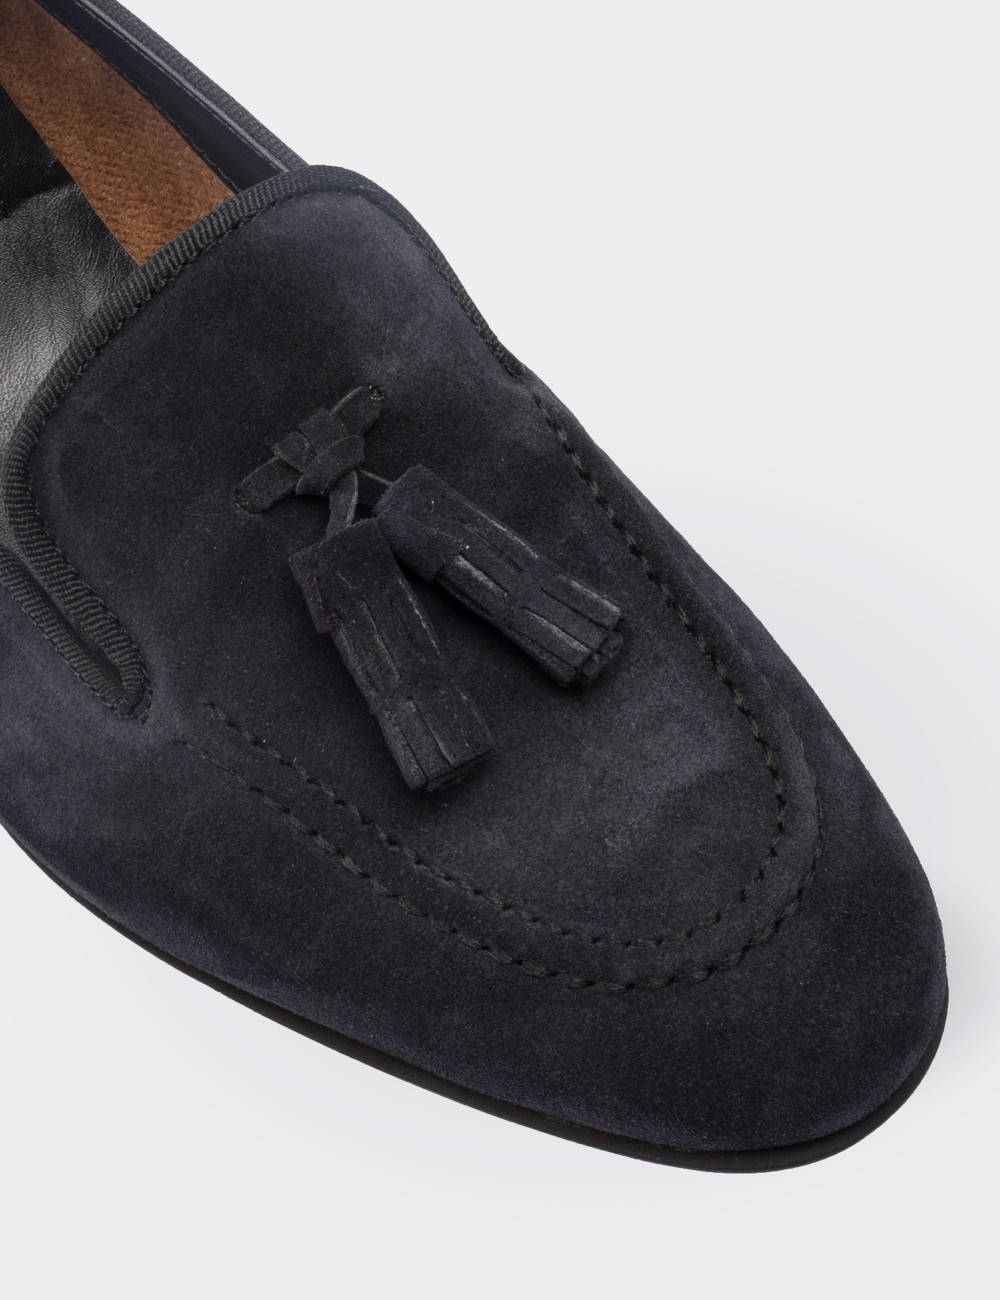 Navy Suede Leather Loafers - 01619ZLCVM01